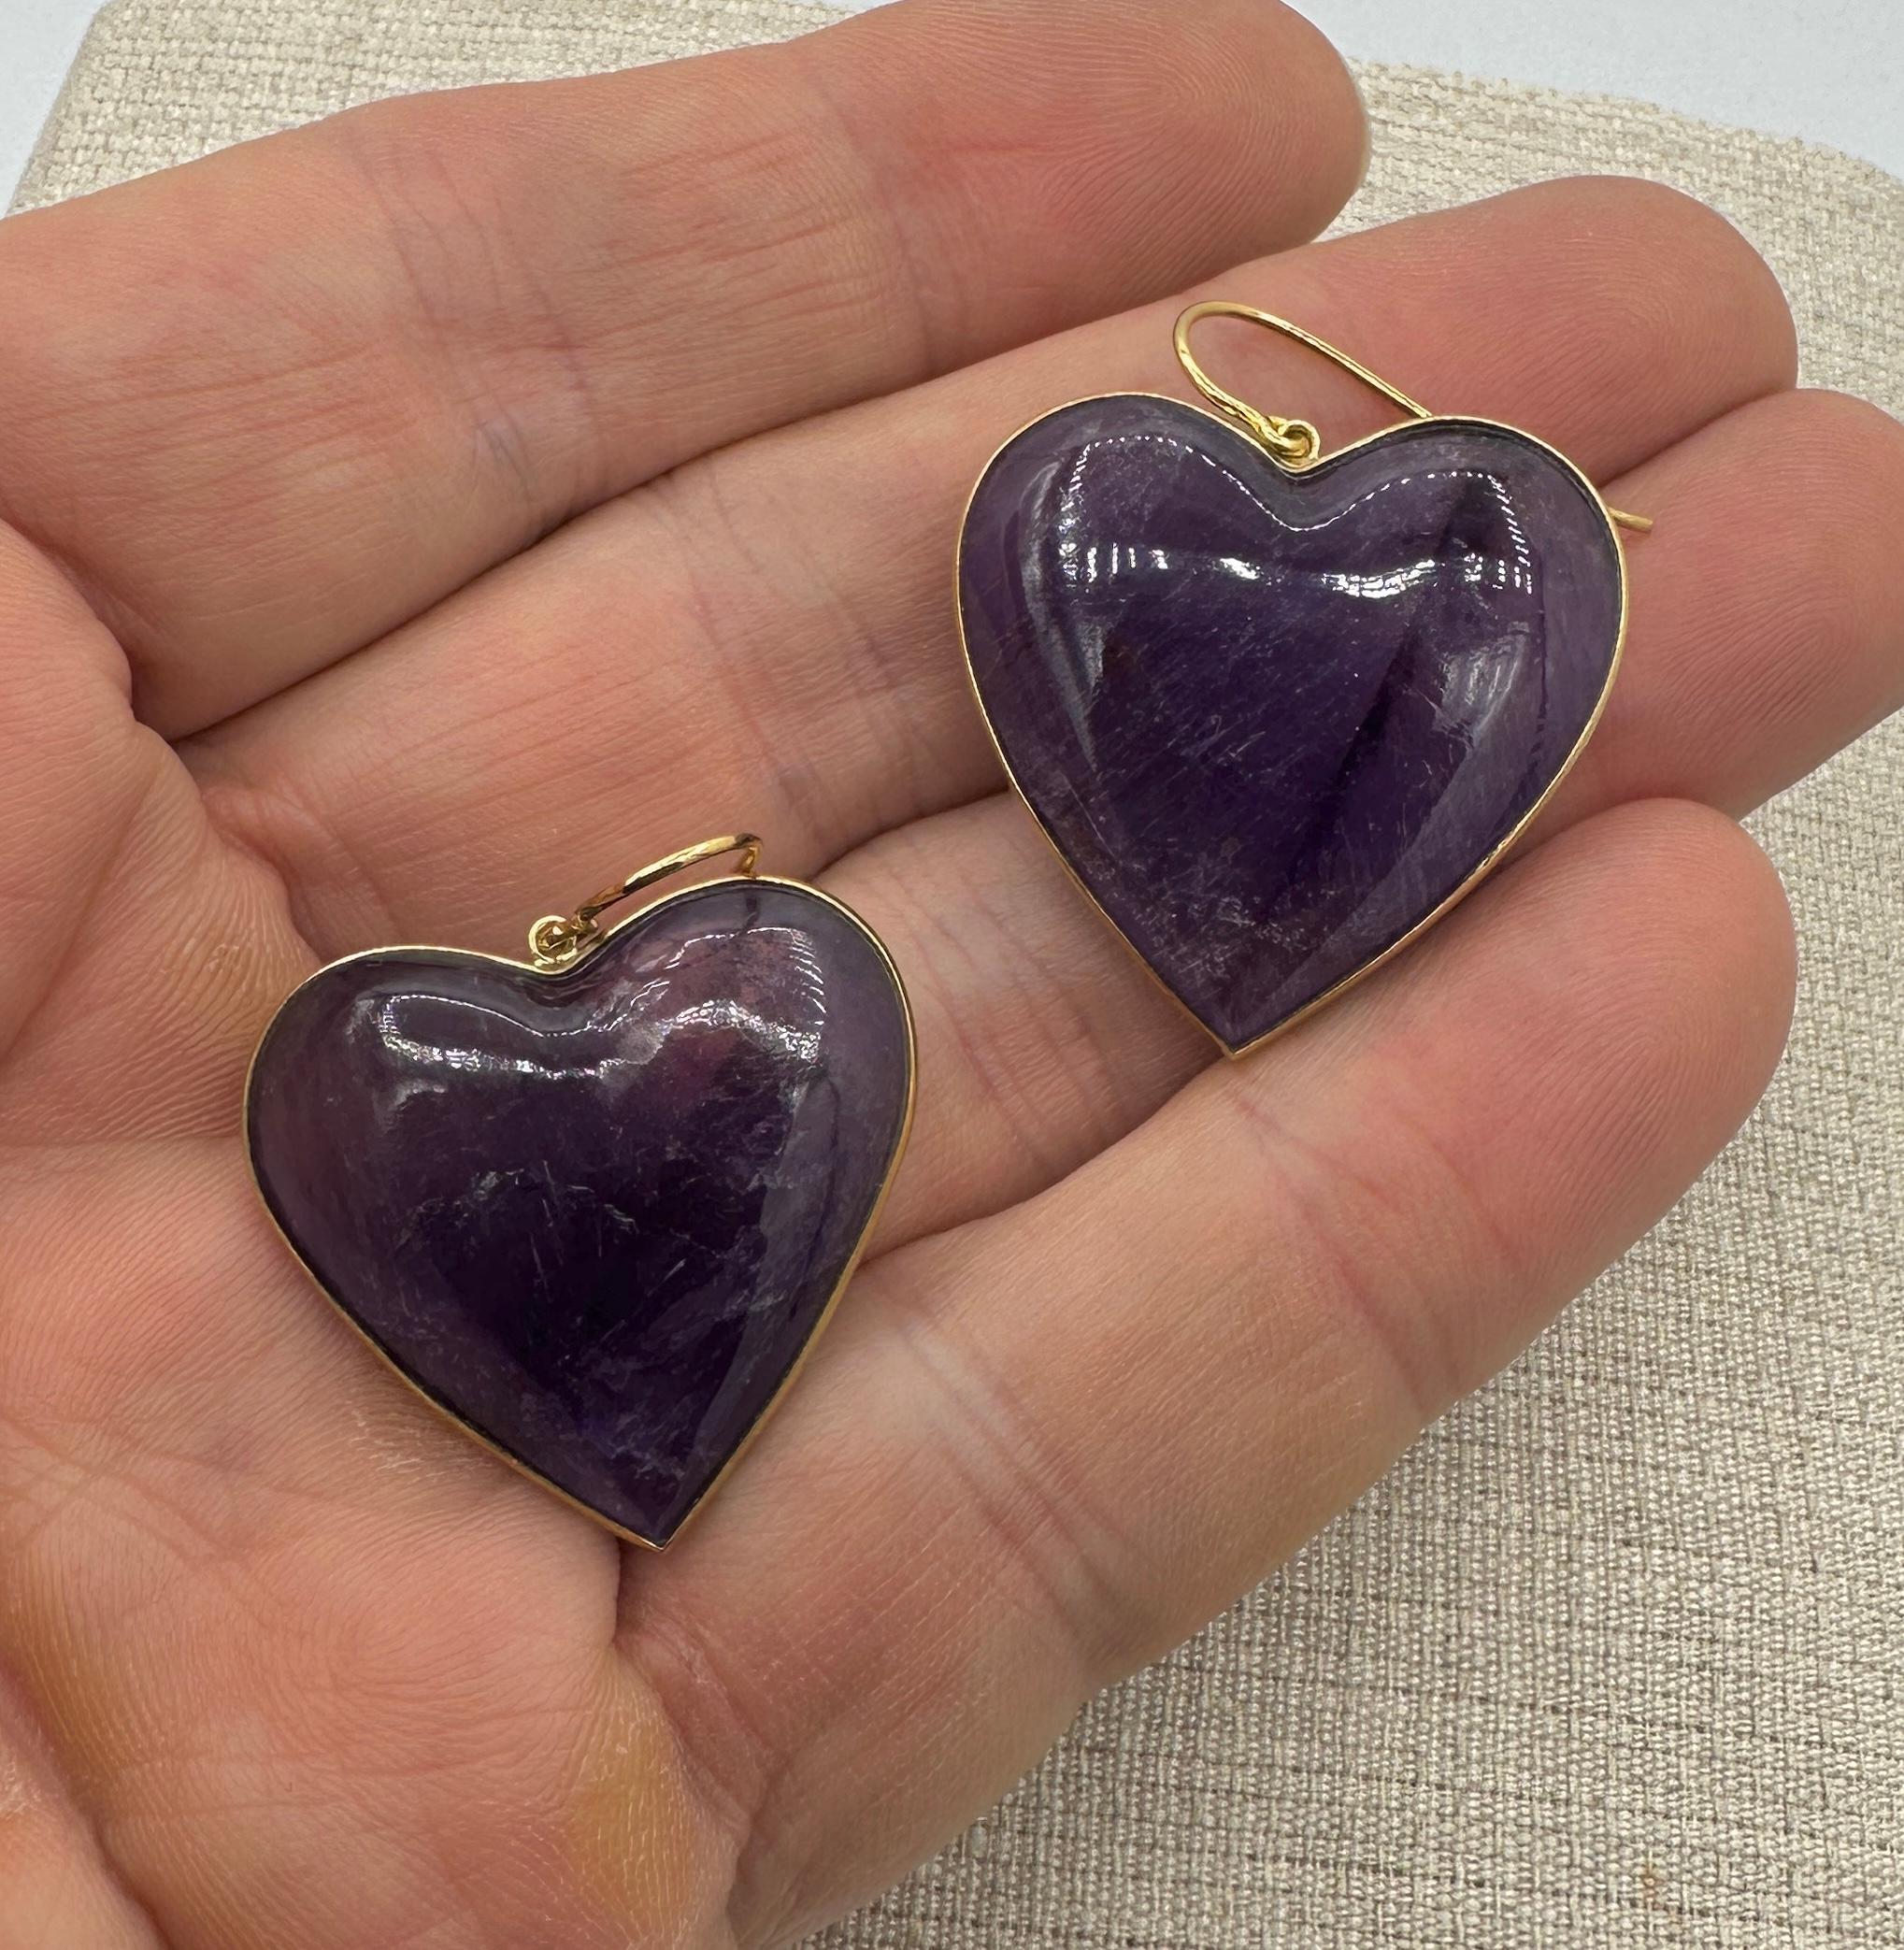 Amethyst Rose Quartz Heart Necklace and Earrings 14 Karat Gold Ms. Daves Estate For Sale 6